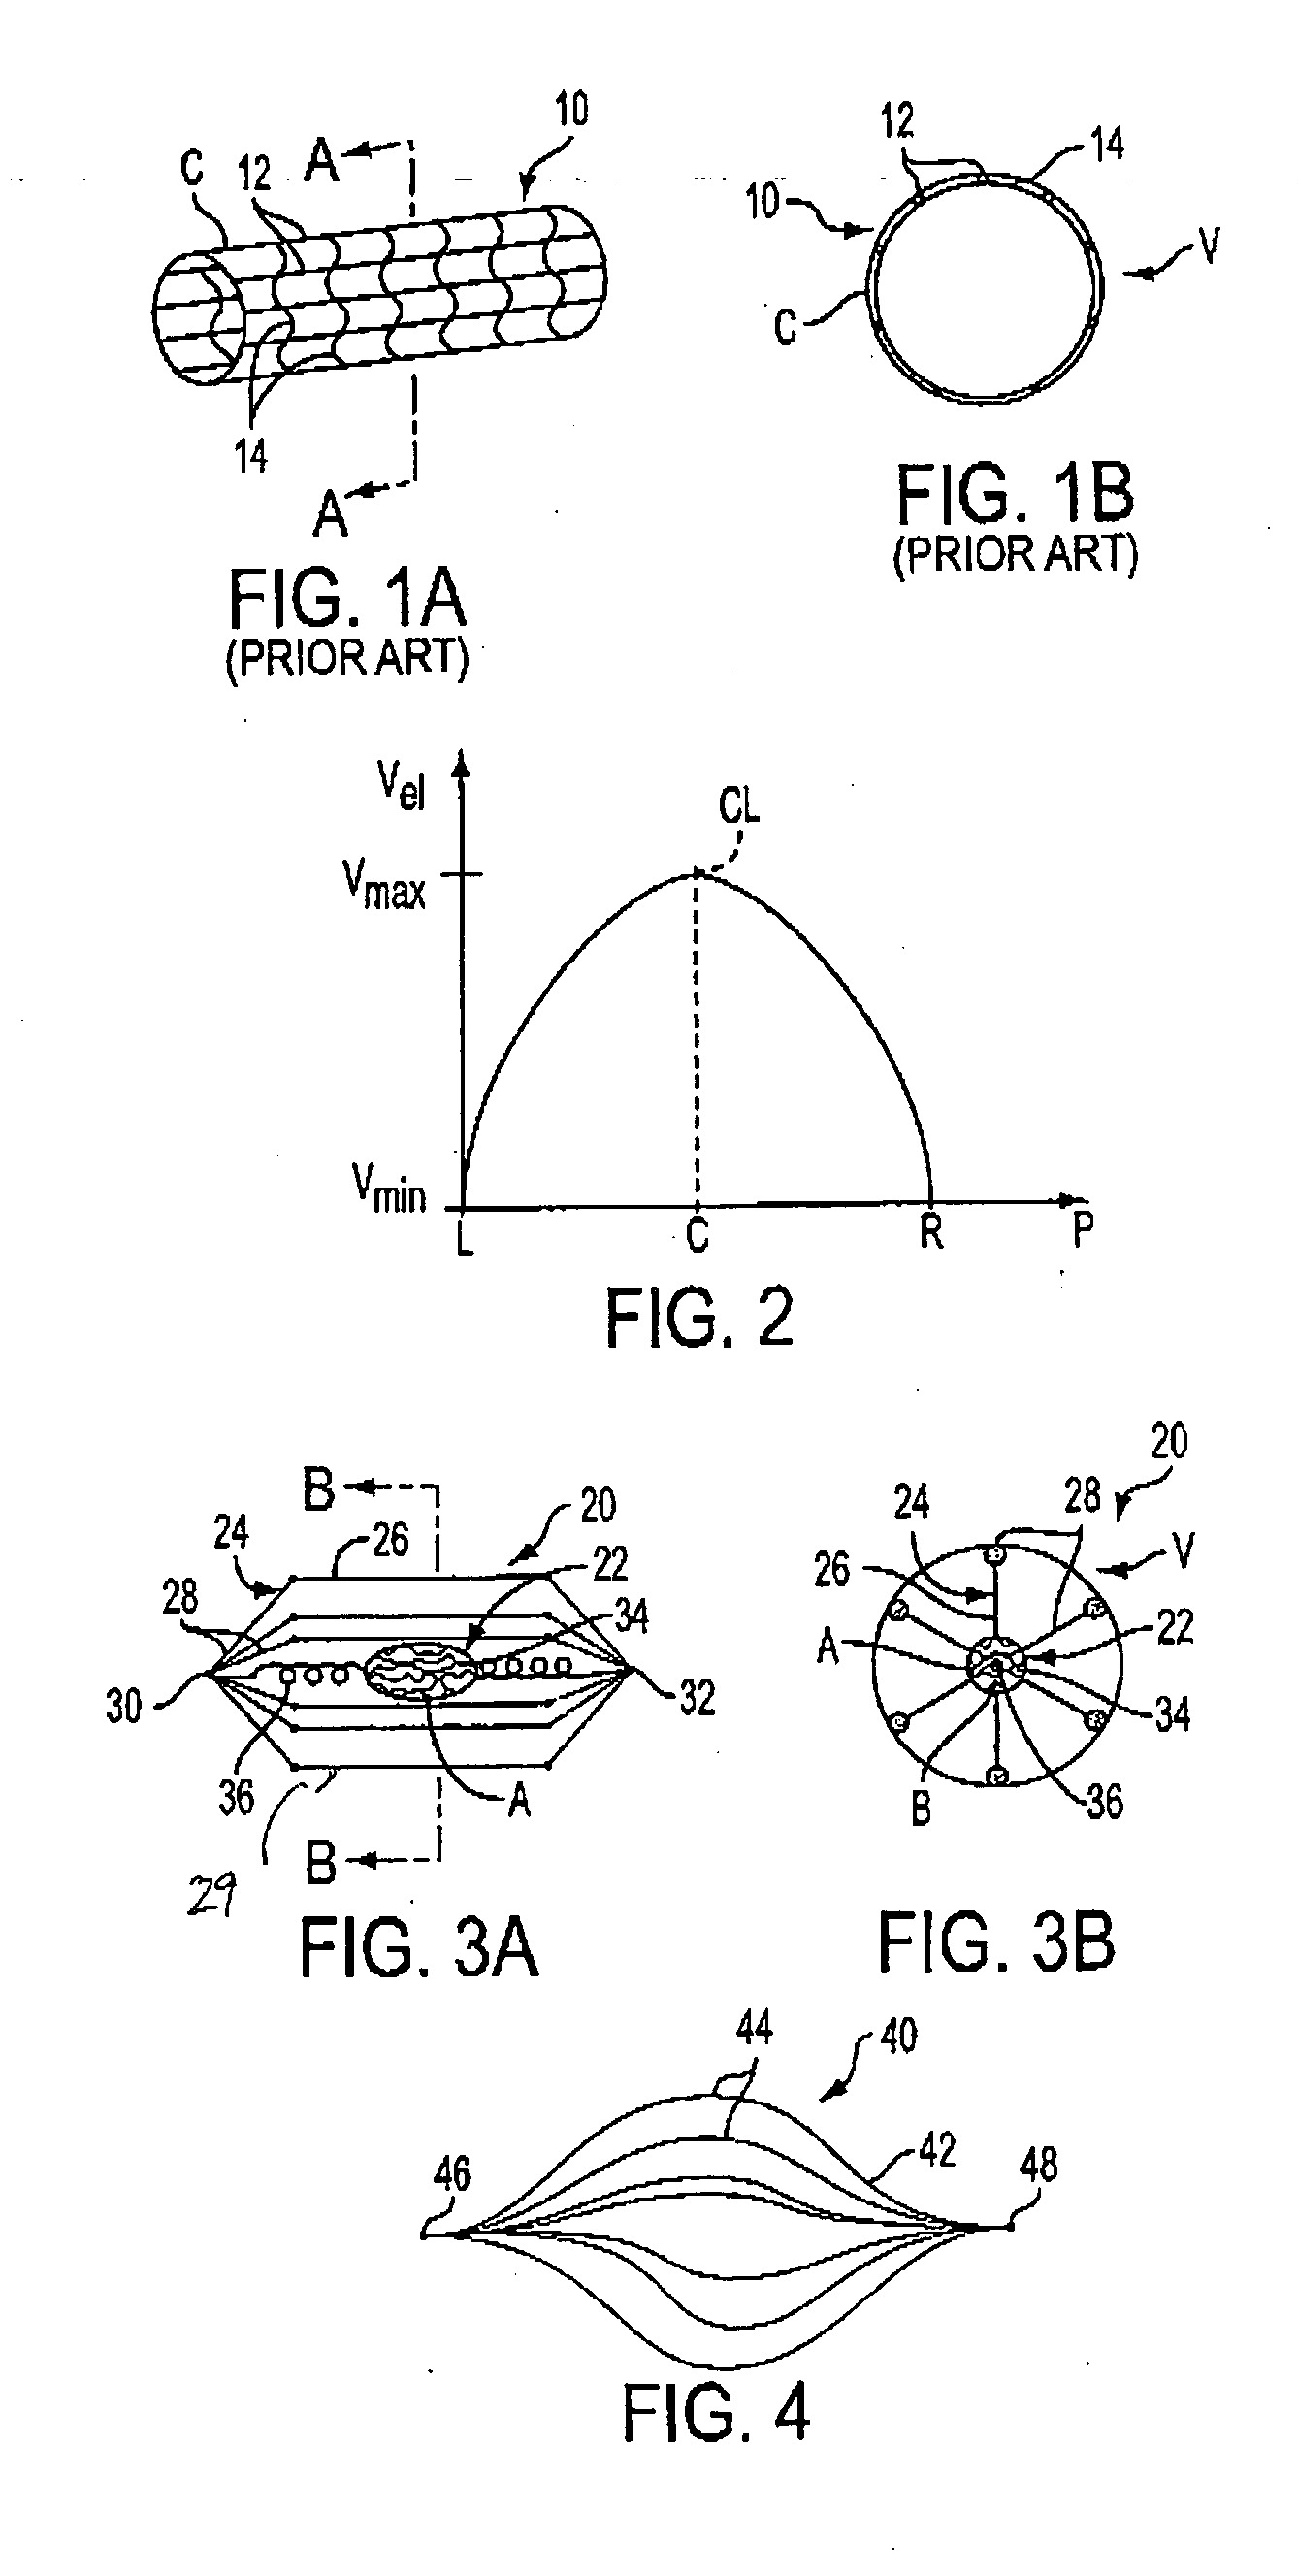 Implantable device for treating disease states and methods of using same